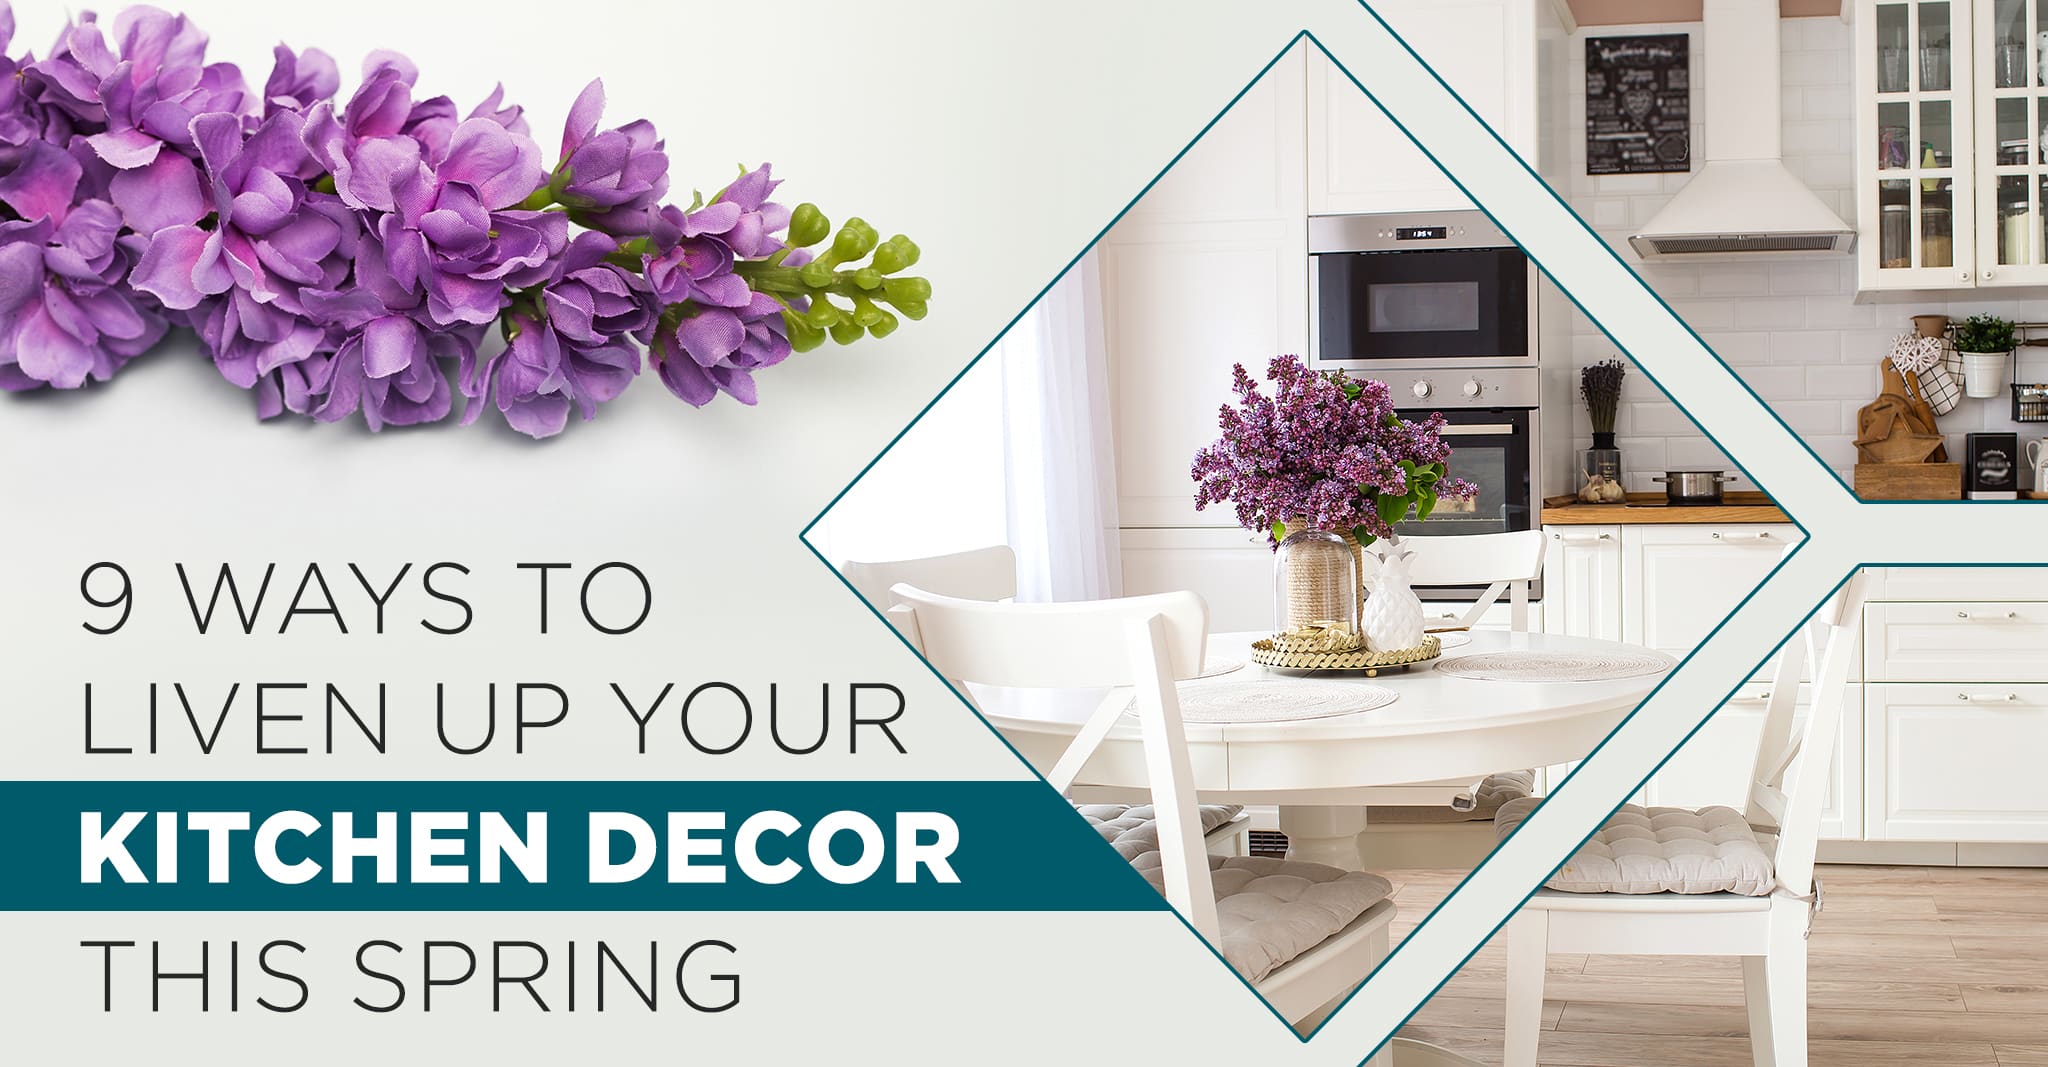 9 Ways to Liven Up Your Kitchen Decor This Spring